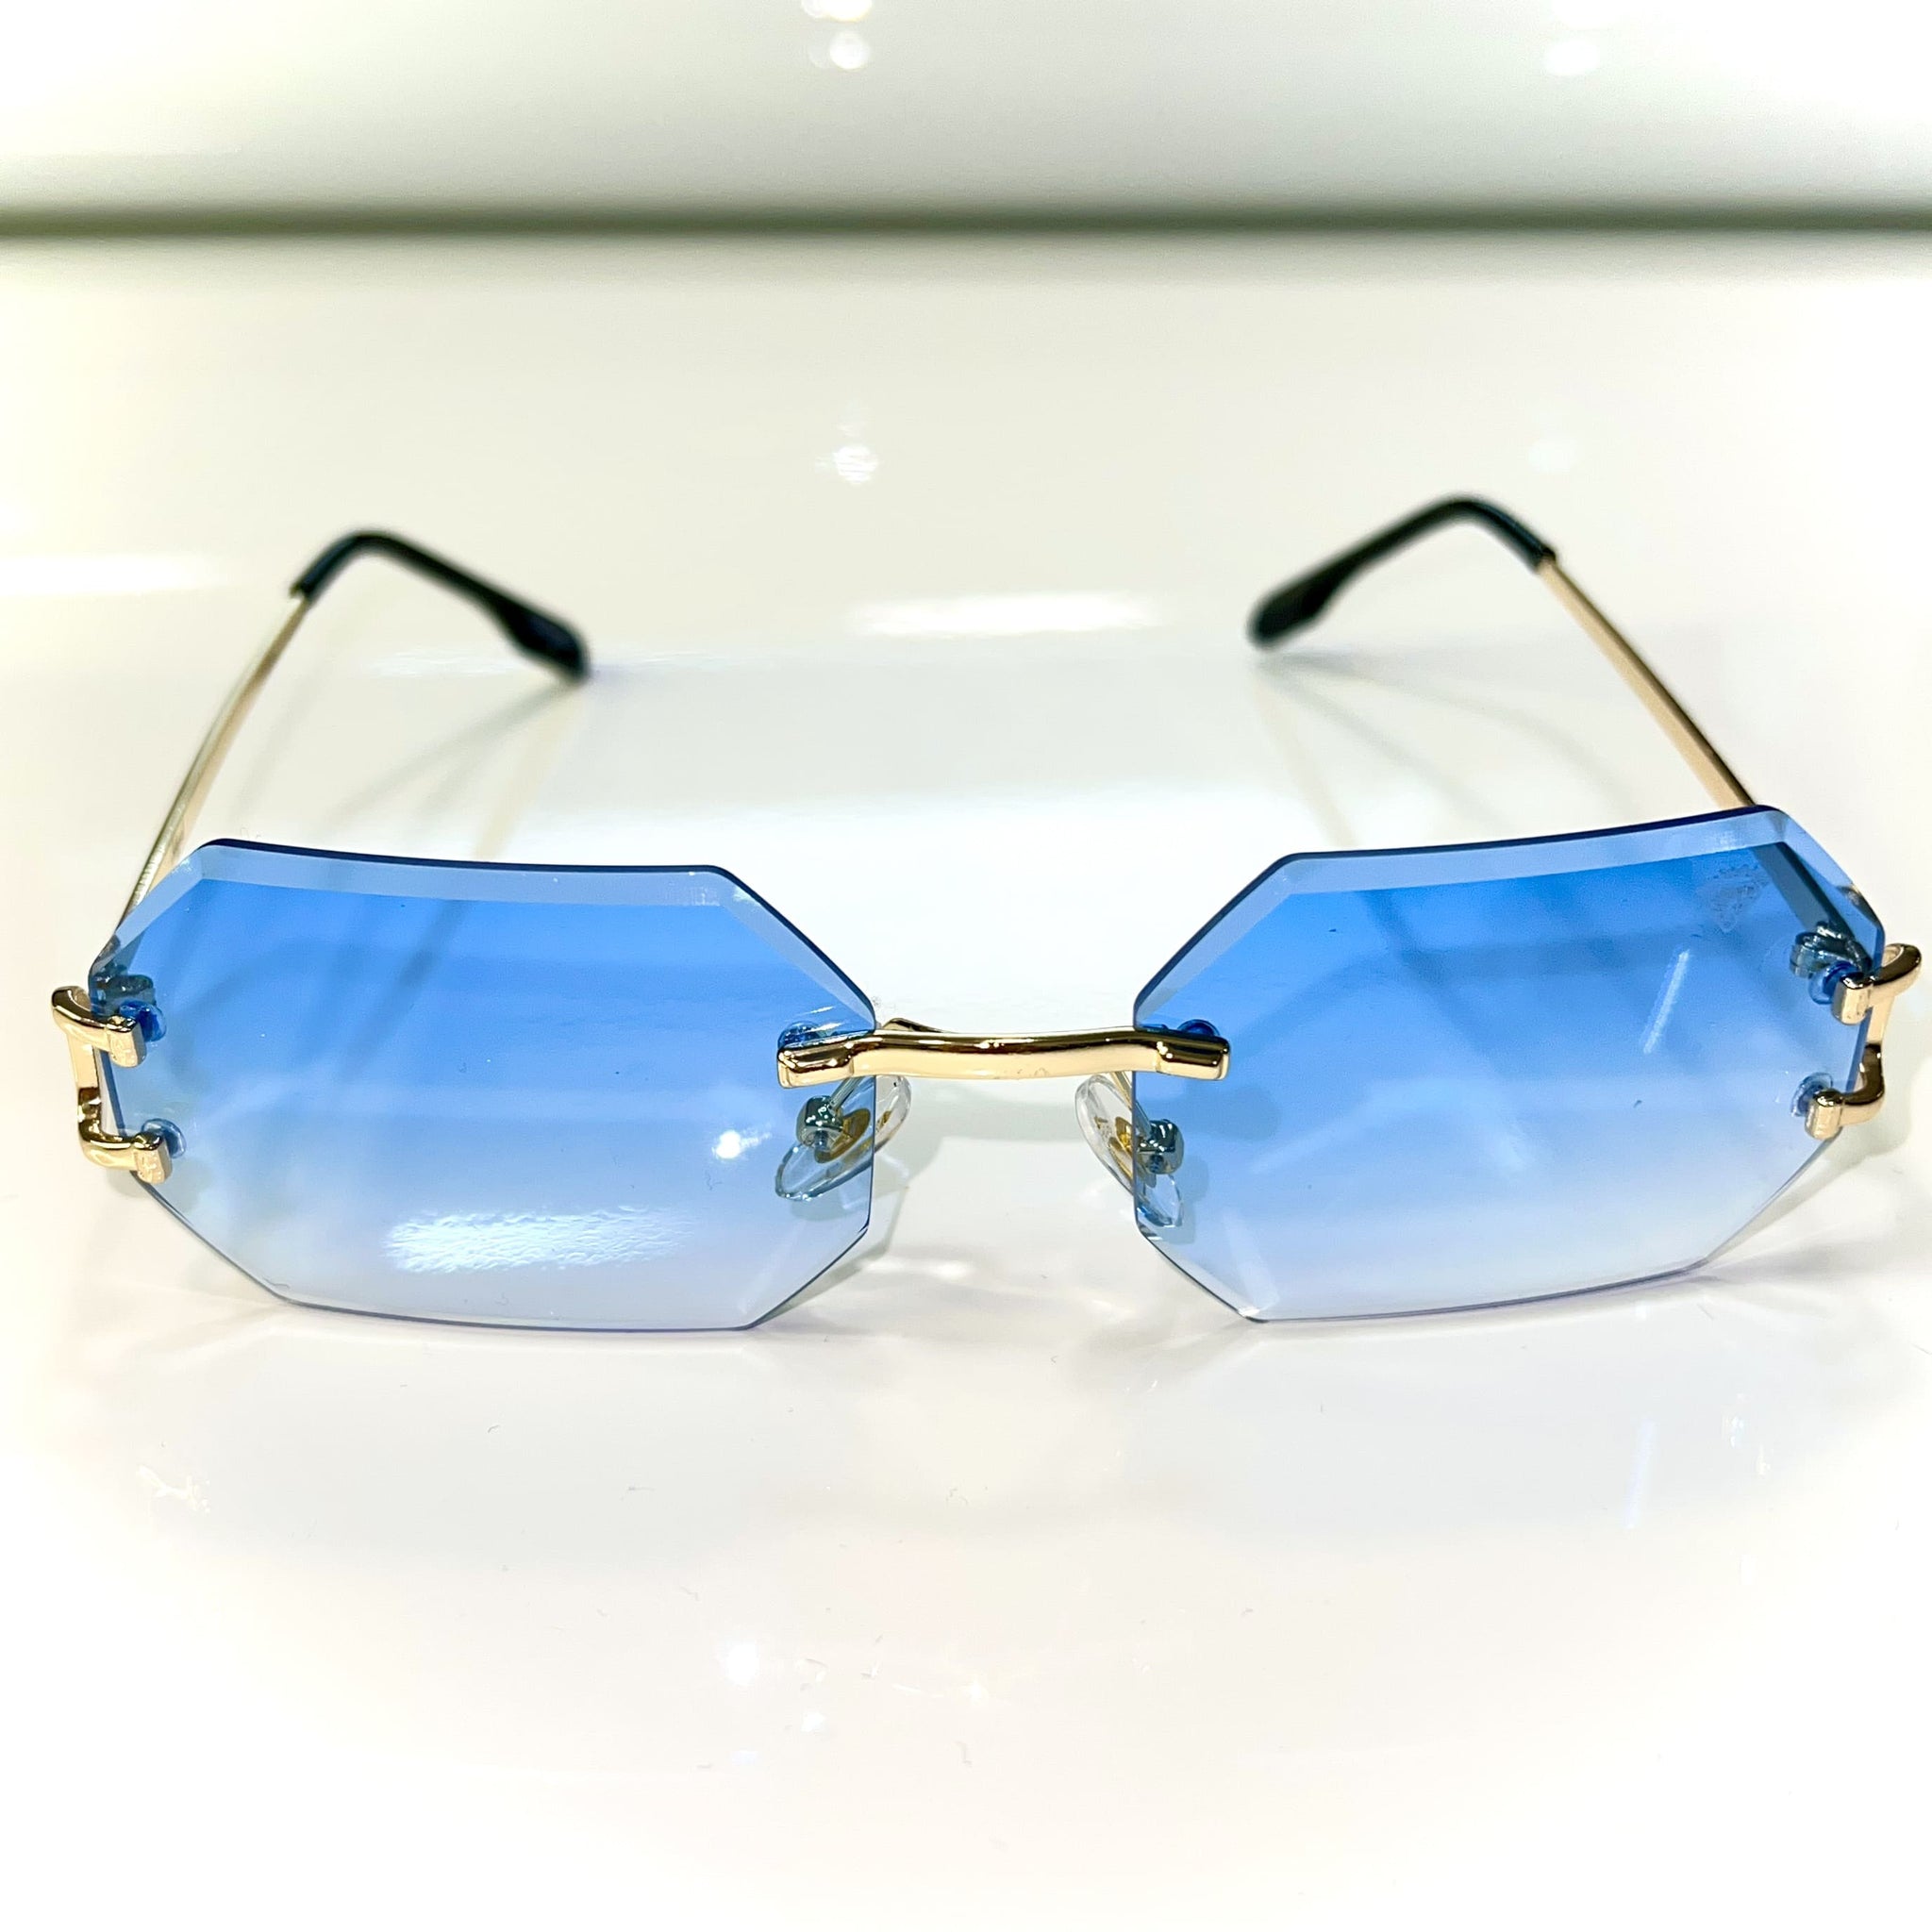 Sparkle Glasses - Diamond Cut - 14k gold plated - Blue Shade - Sehgal Glasses